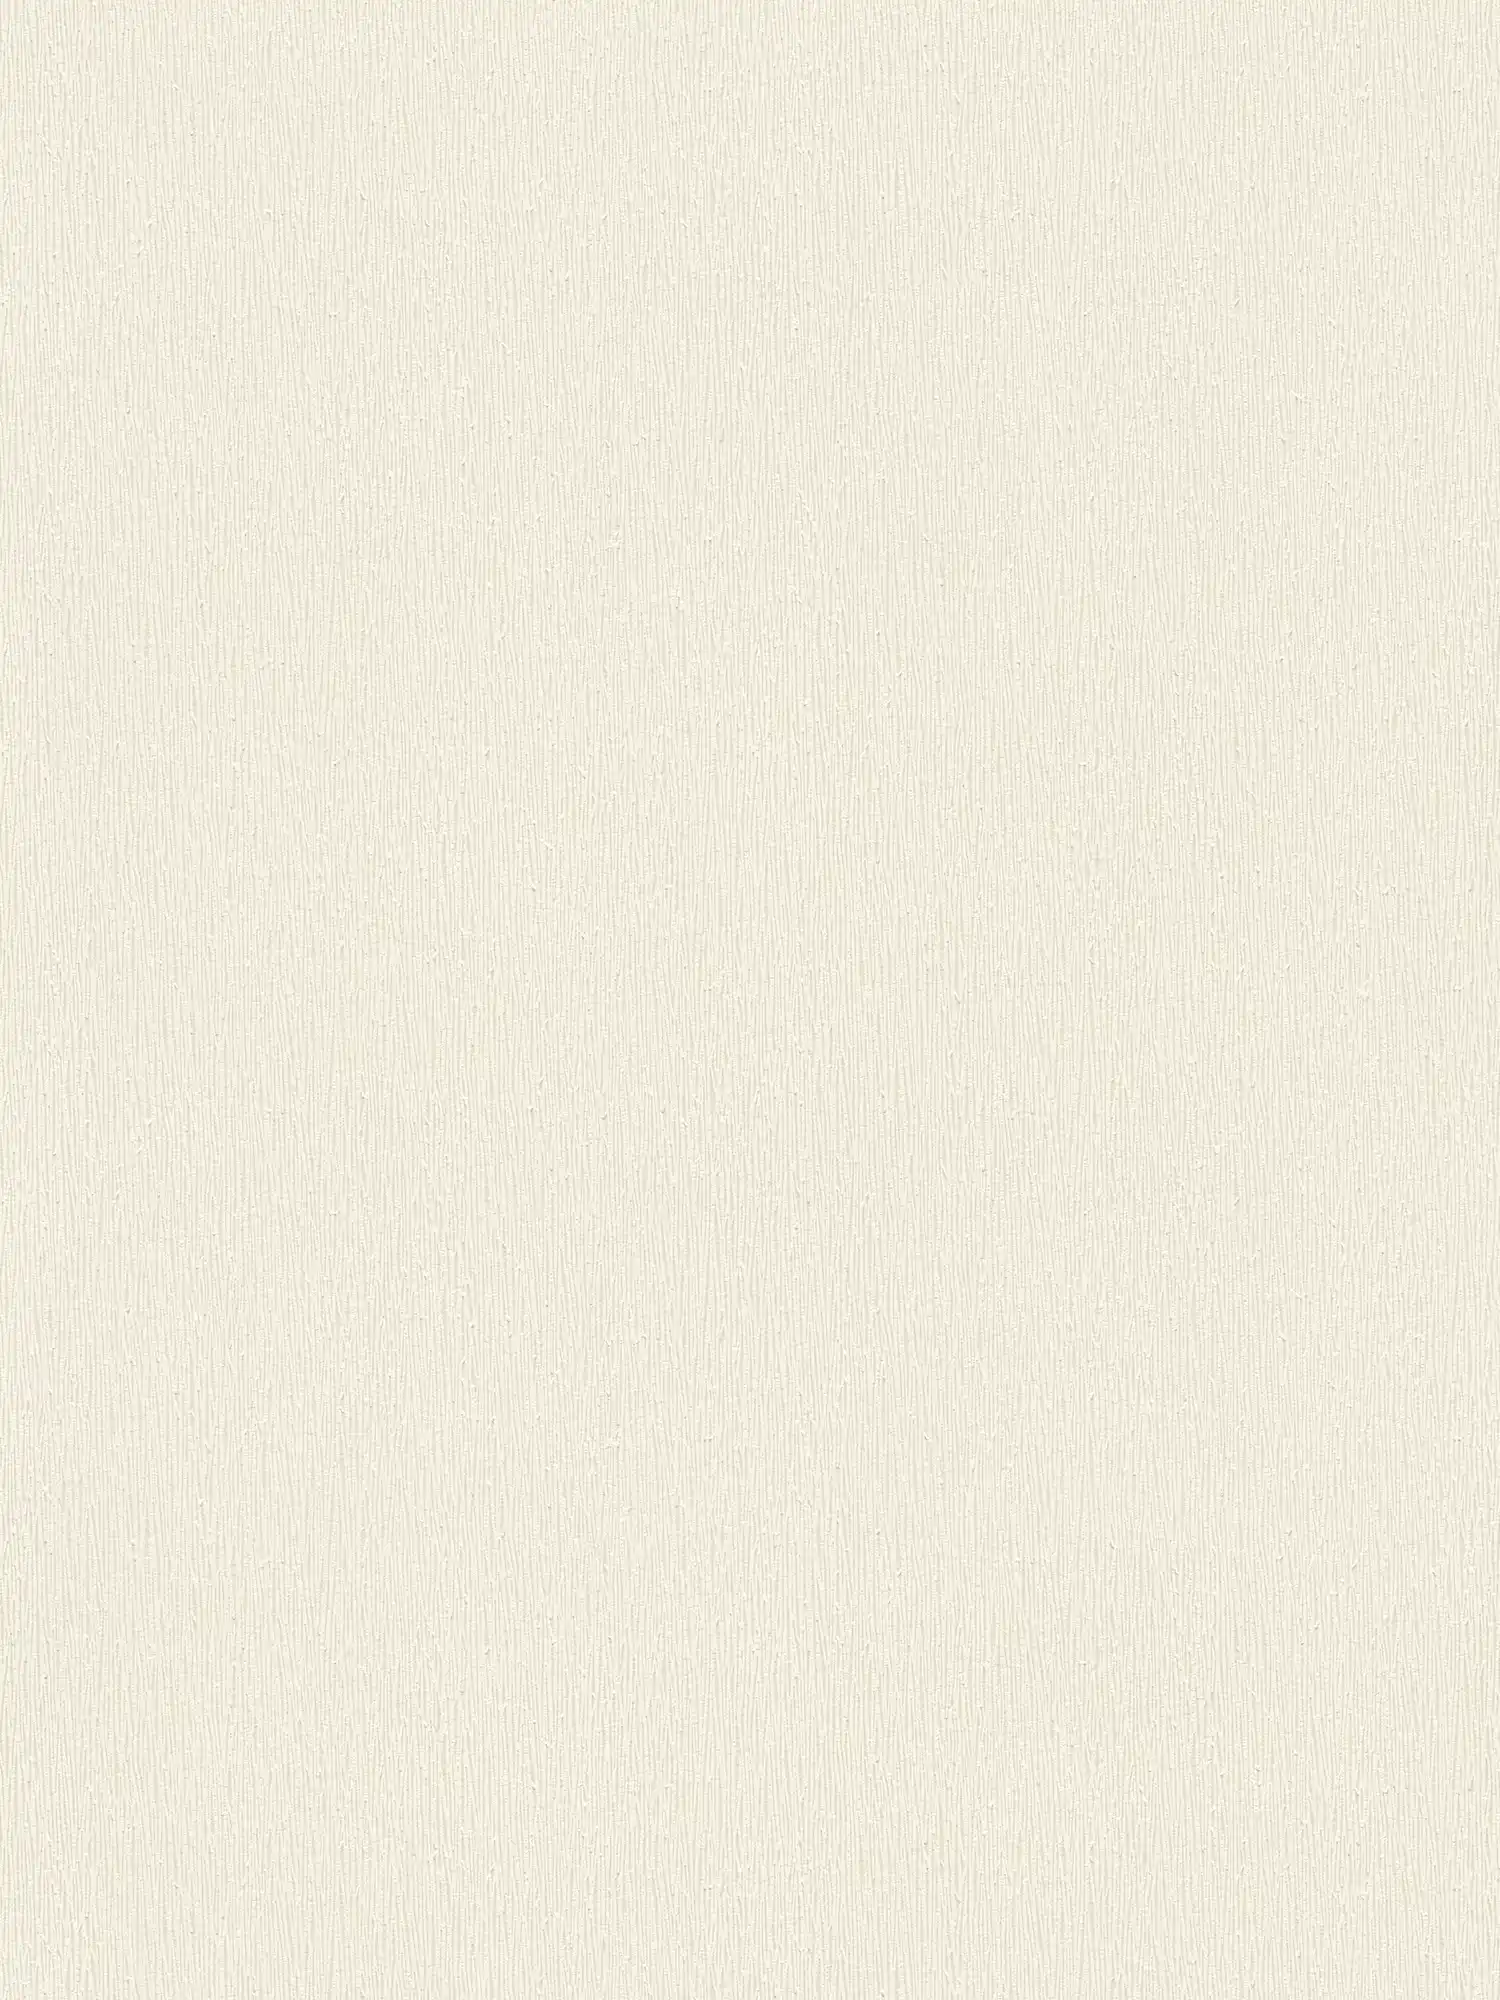 Plain wallpaper cream with natural texture pattern
